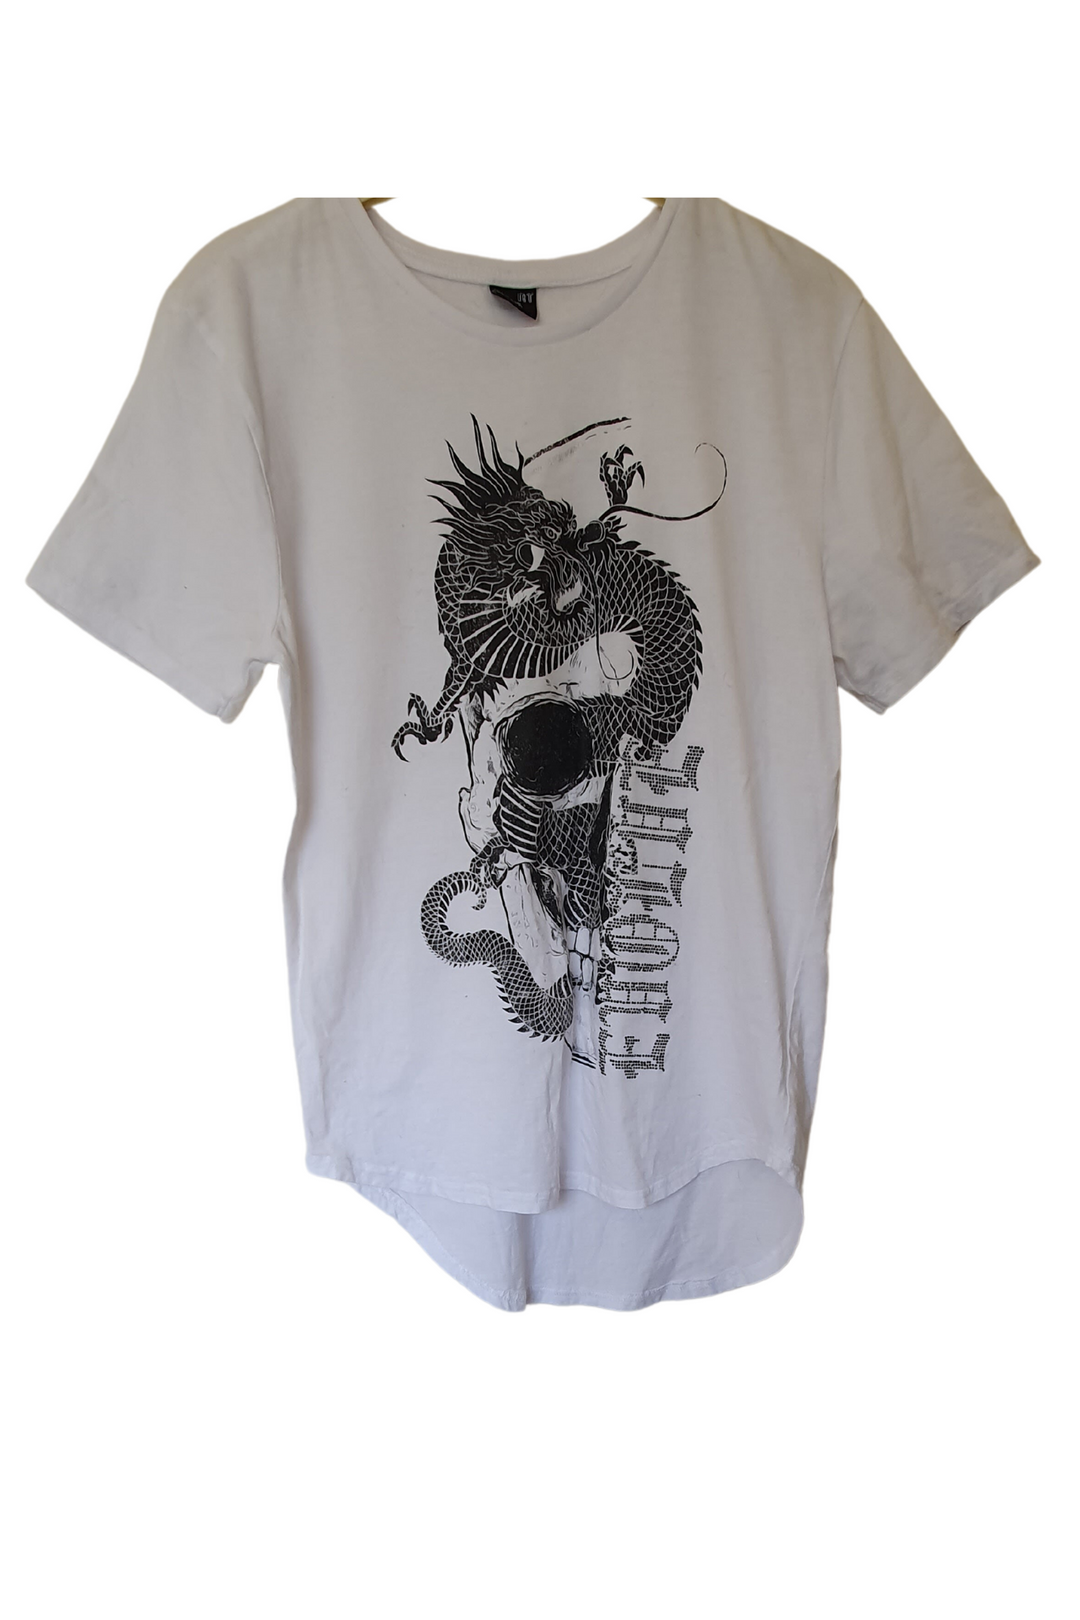 WHITE T-SHIRT WITH A BLACK DRAGON DESIGN AND WORDS